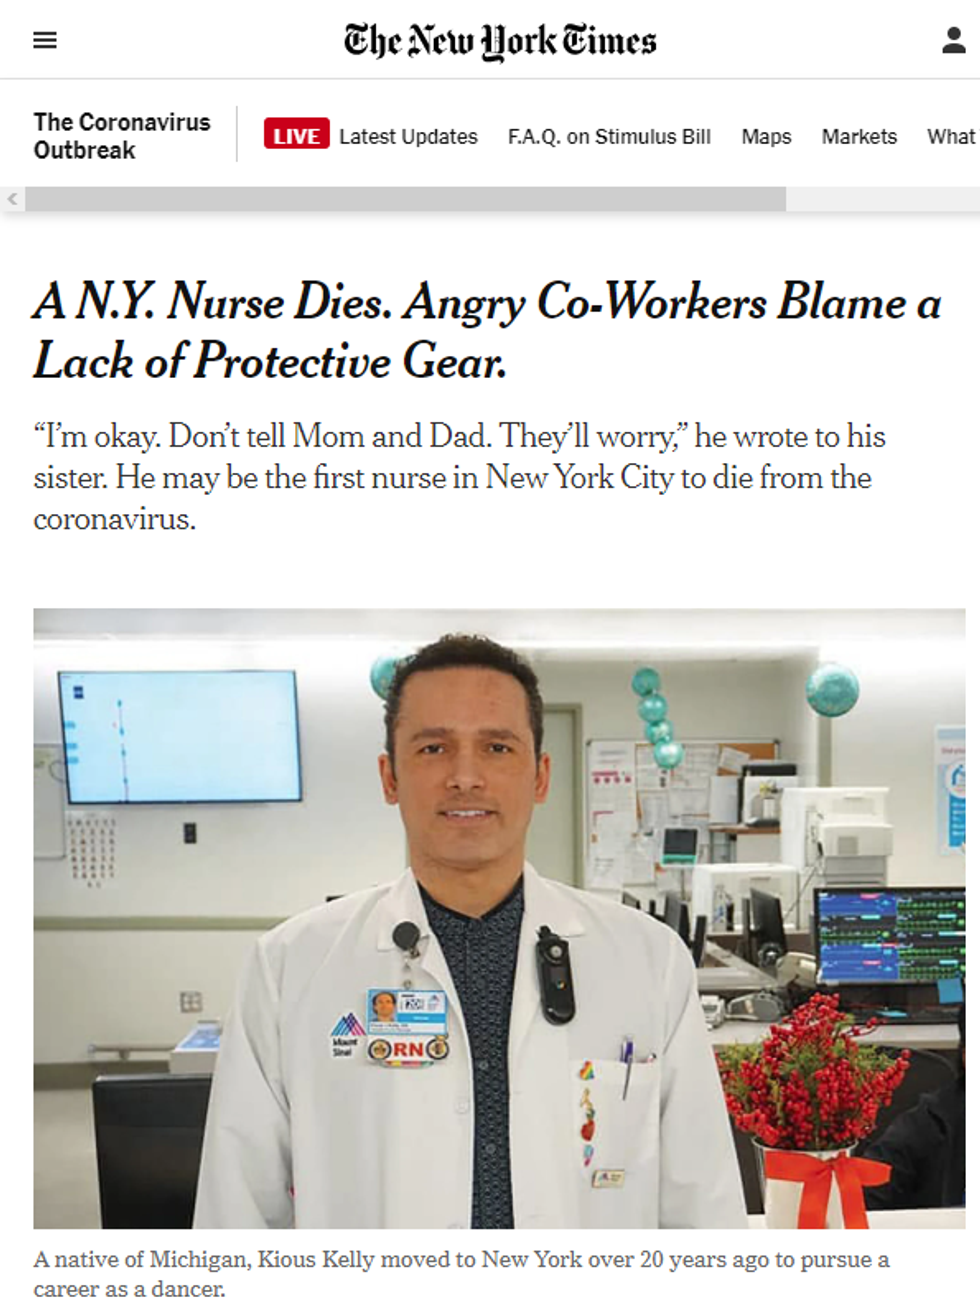 NYT: A N.Y. Nurse Dies. Angry Co-Workers Blame a Lack of Protective Gear.